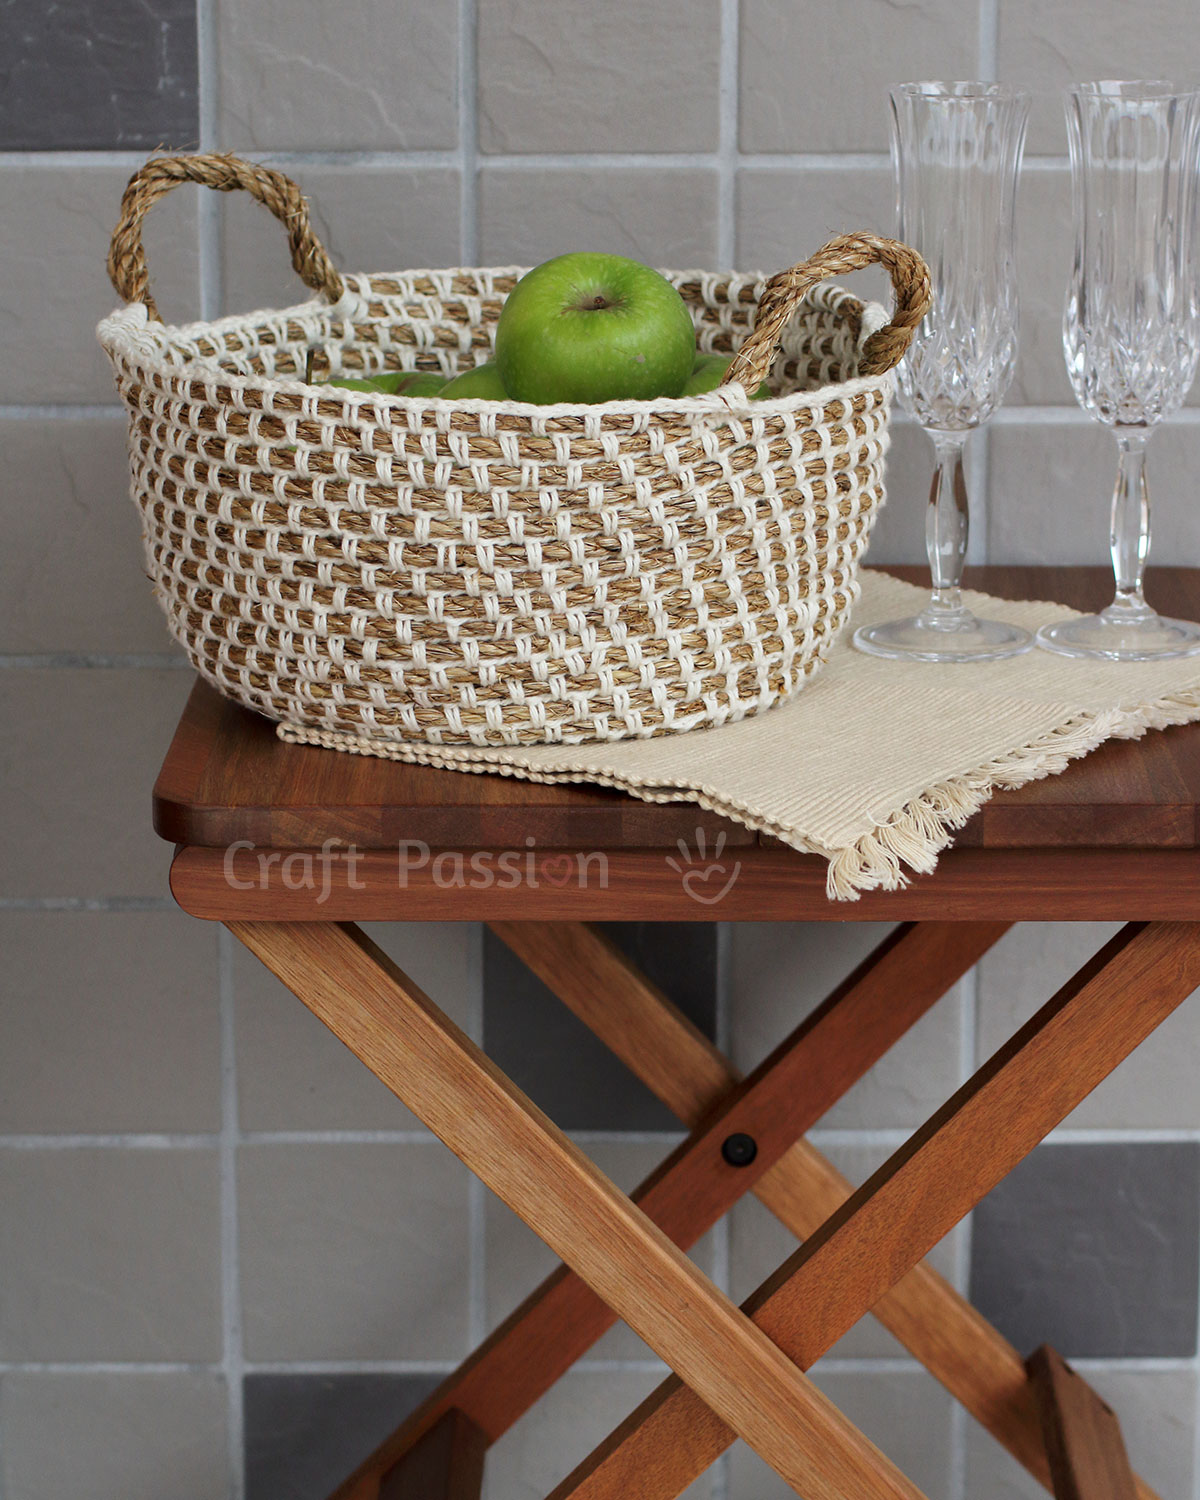 Make your own hemp basket with this crochet basket pattern & tutorial. Know basic crochet technique to complete it. It uses manila rope and yarn to build.